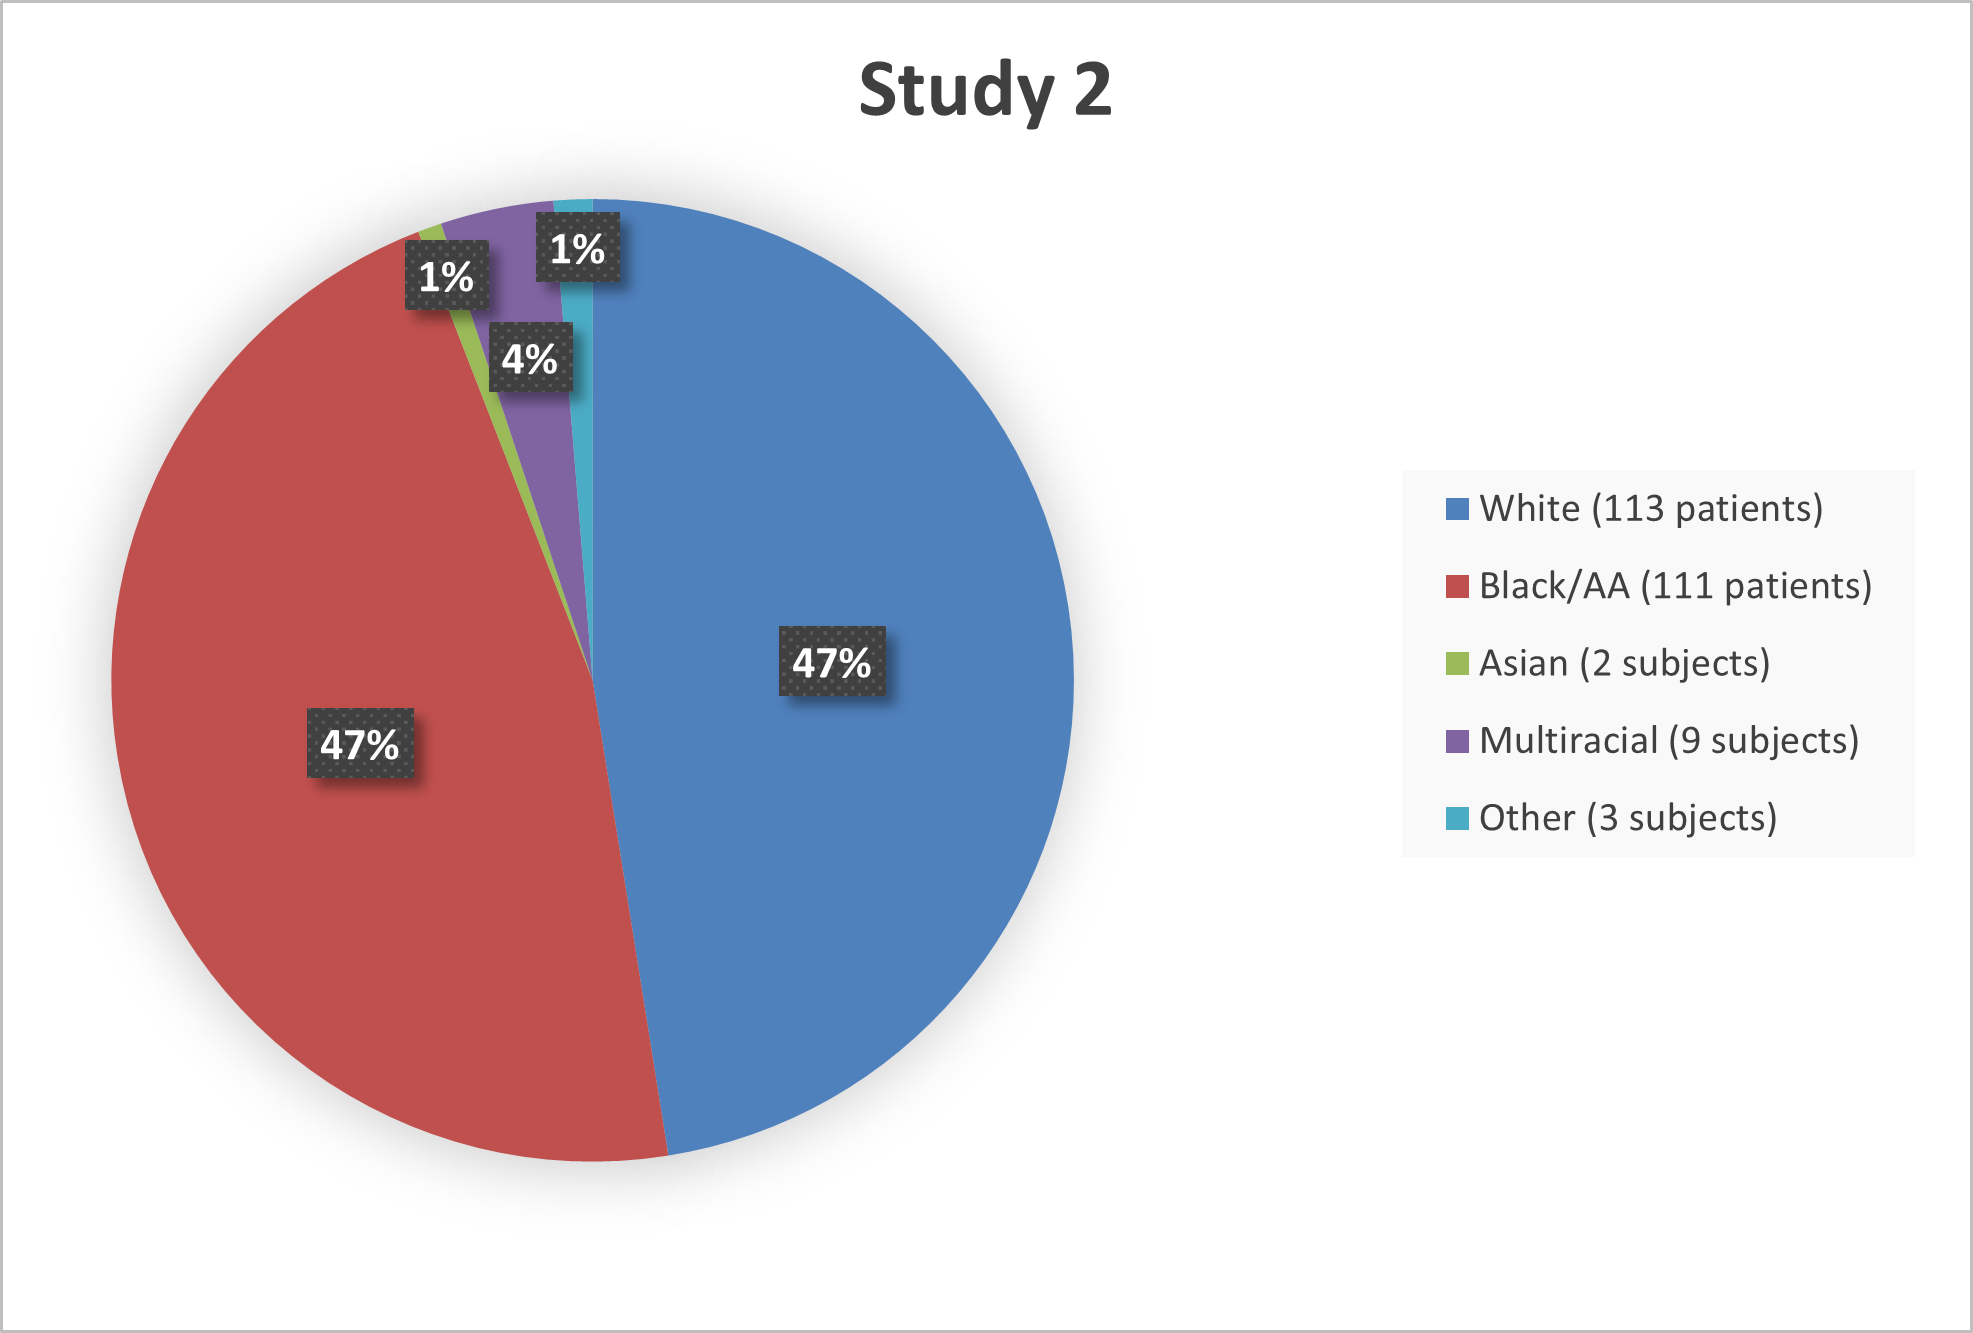 Figures 4 summarize the percentage of patients by race that were enrolled in trials used to evaluate the efficacy and safety of AZSTARYS